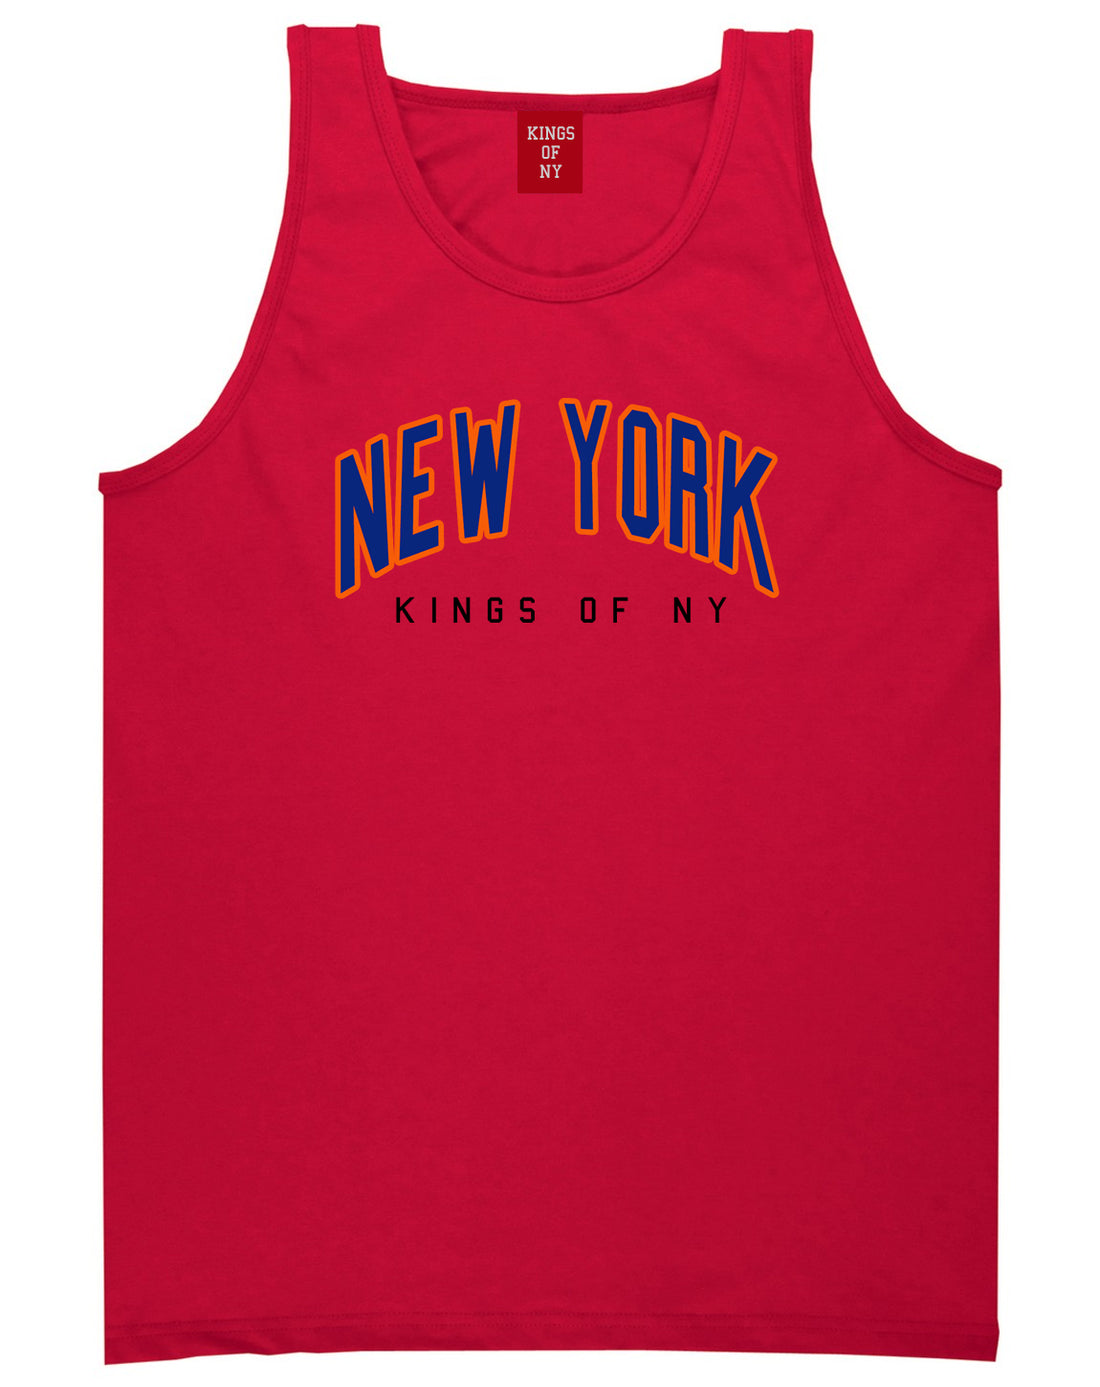 New York Blue And Orange Mens Tank Top Shirt Red by Kings Of NY